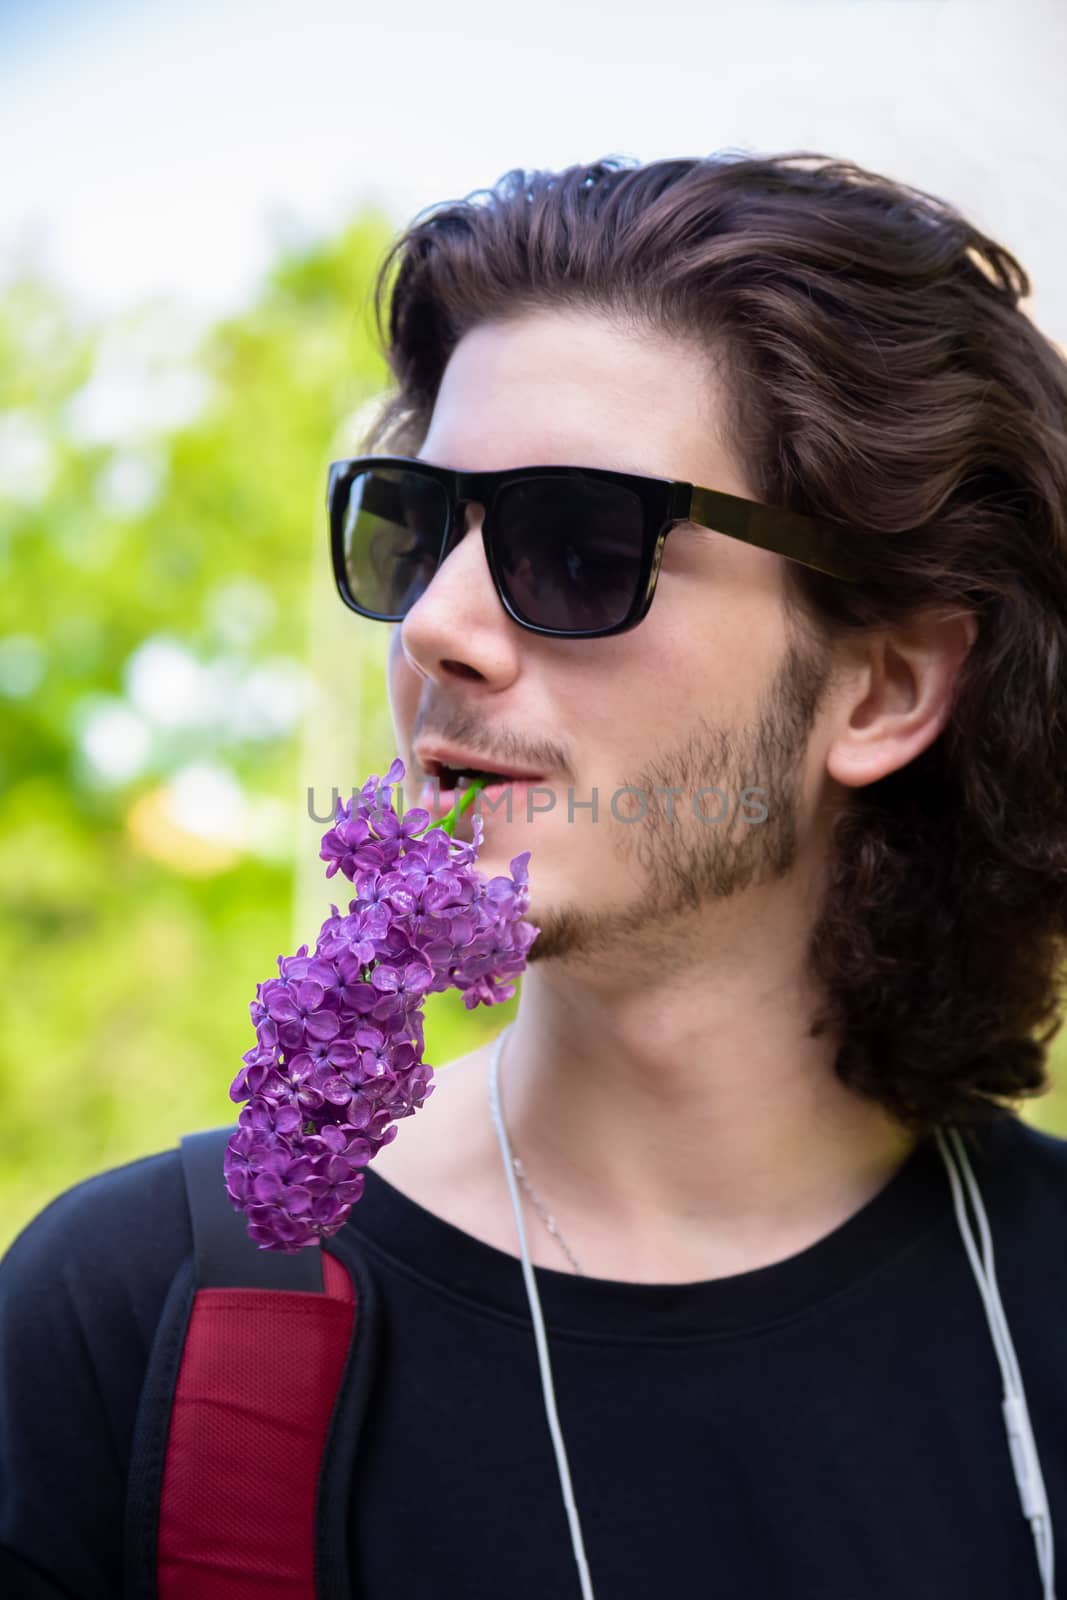 Young brunette man with long curly hair and sunglasses holds fresh flowers in his mouth on a lilac branch and looks away on a blurred background.